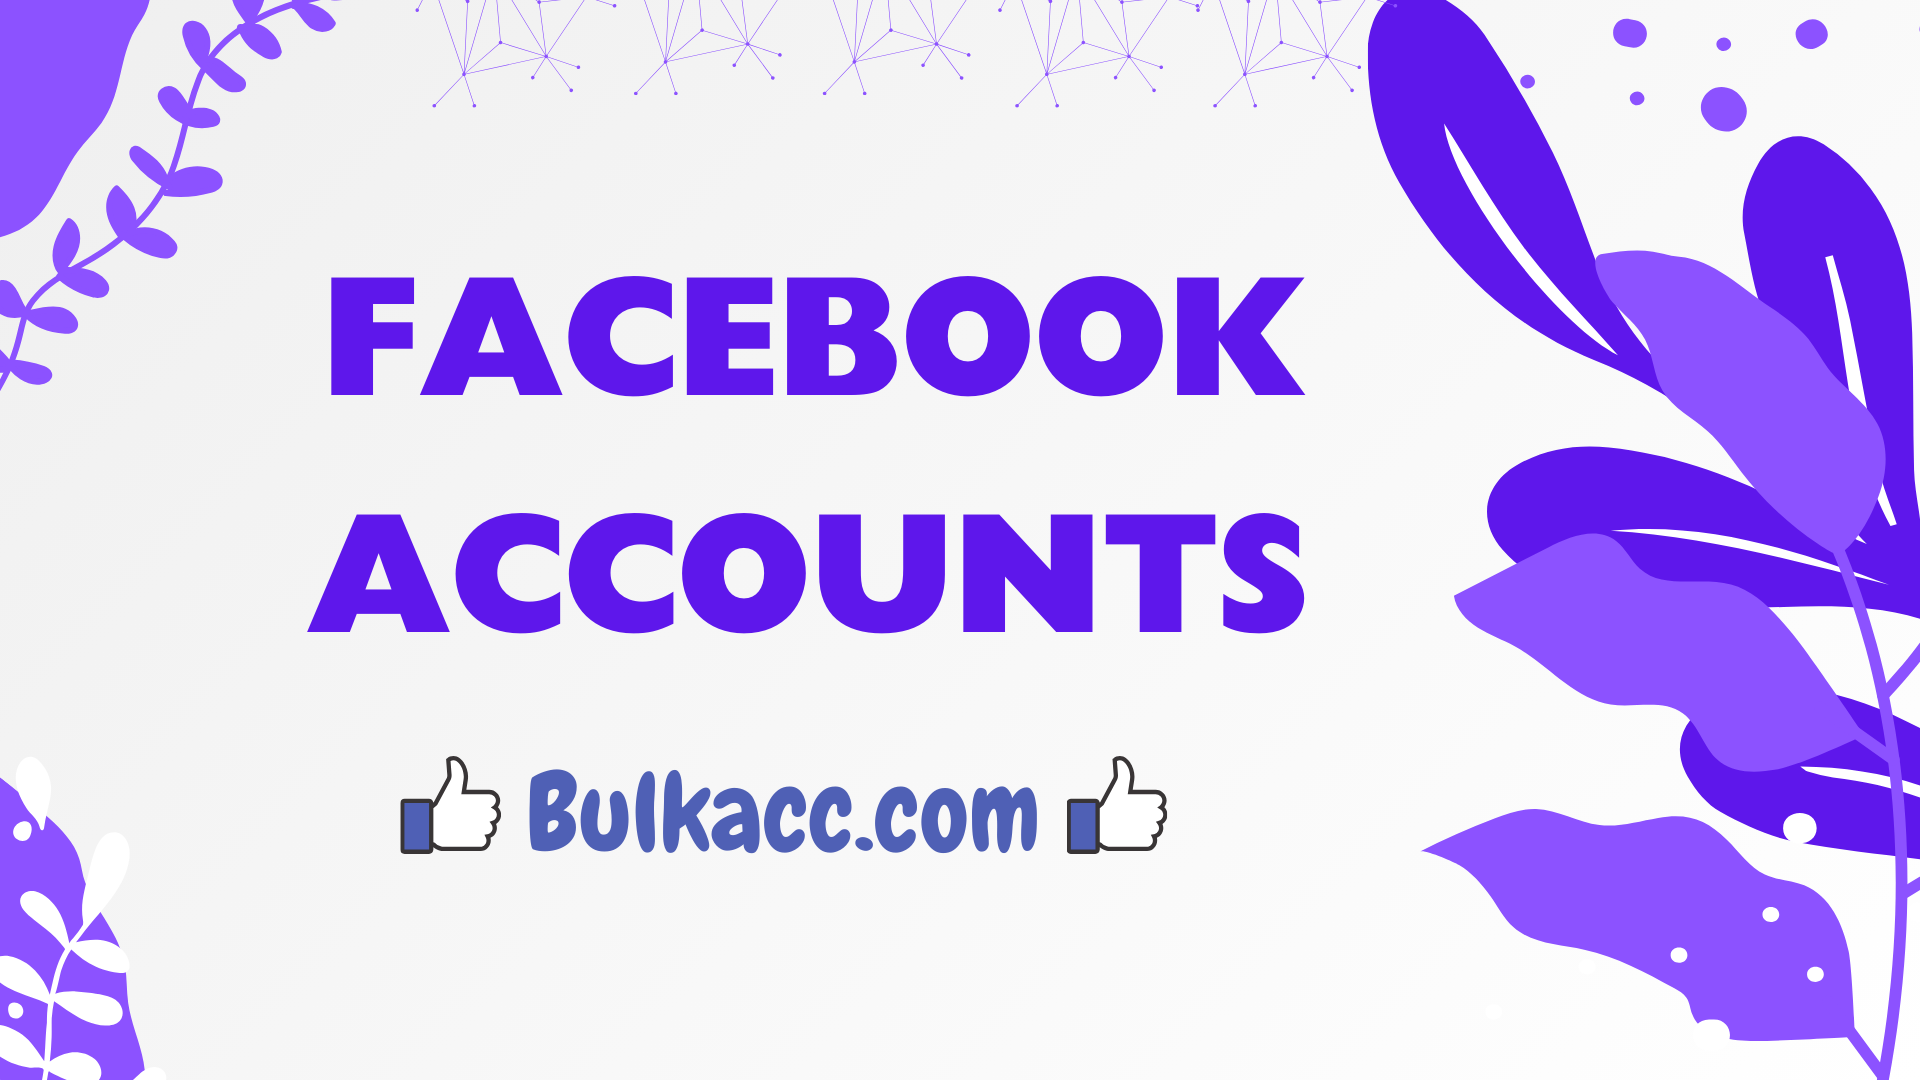 Owning multiple verified and aged Facebook accounts is the choice of many individuals and businesses to accelerate business strategies on Facebook.